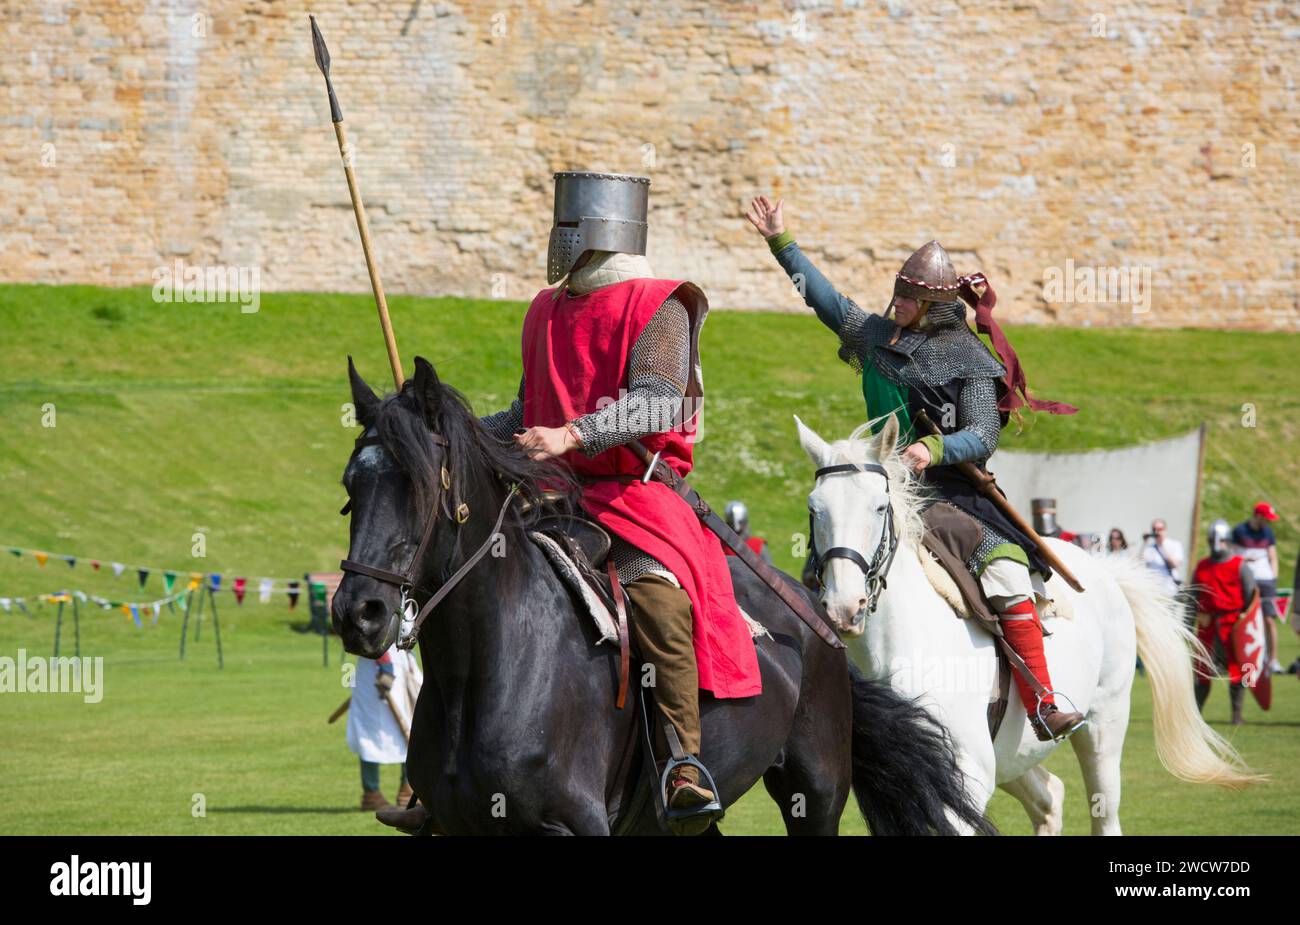 Lincoln, Lincolnshire, England. Mounted warriors taking part in a medieval battle re-enactment on the lawns of Lincoln Castle. Stock Photo